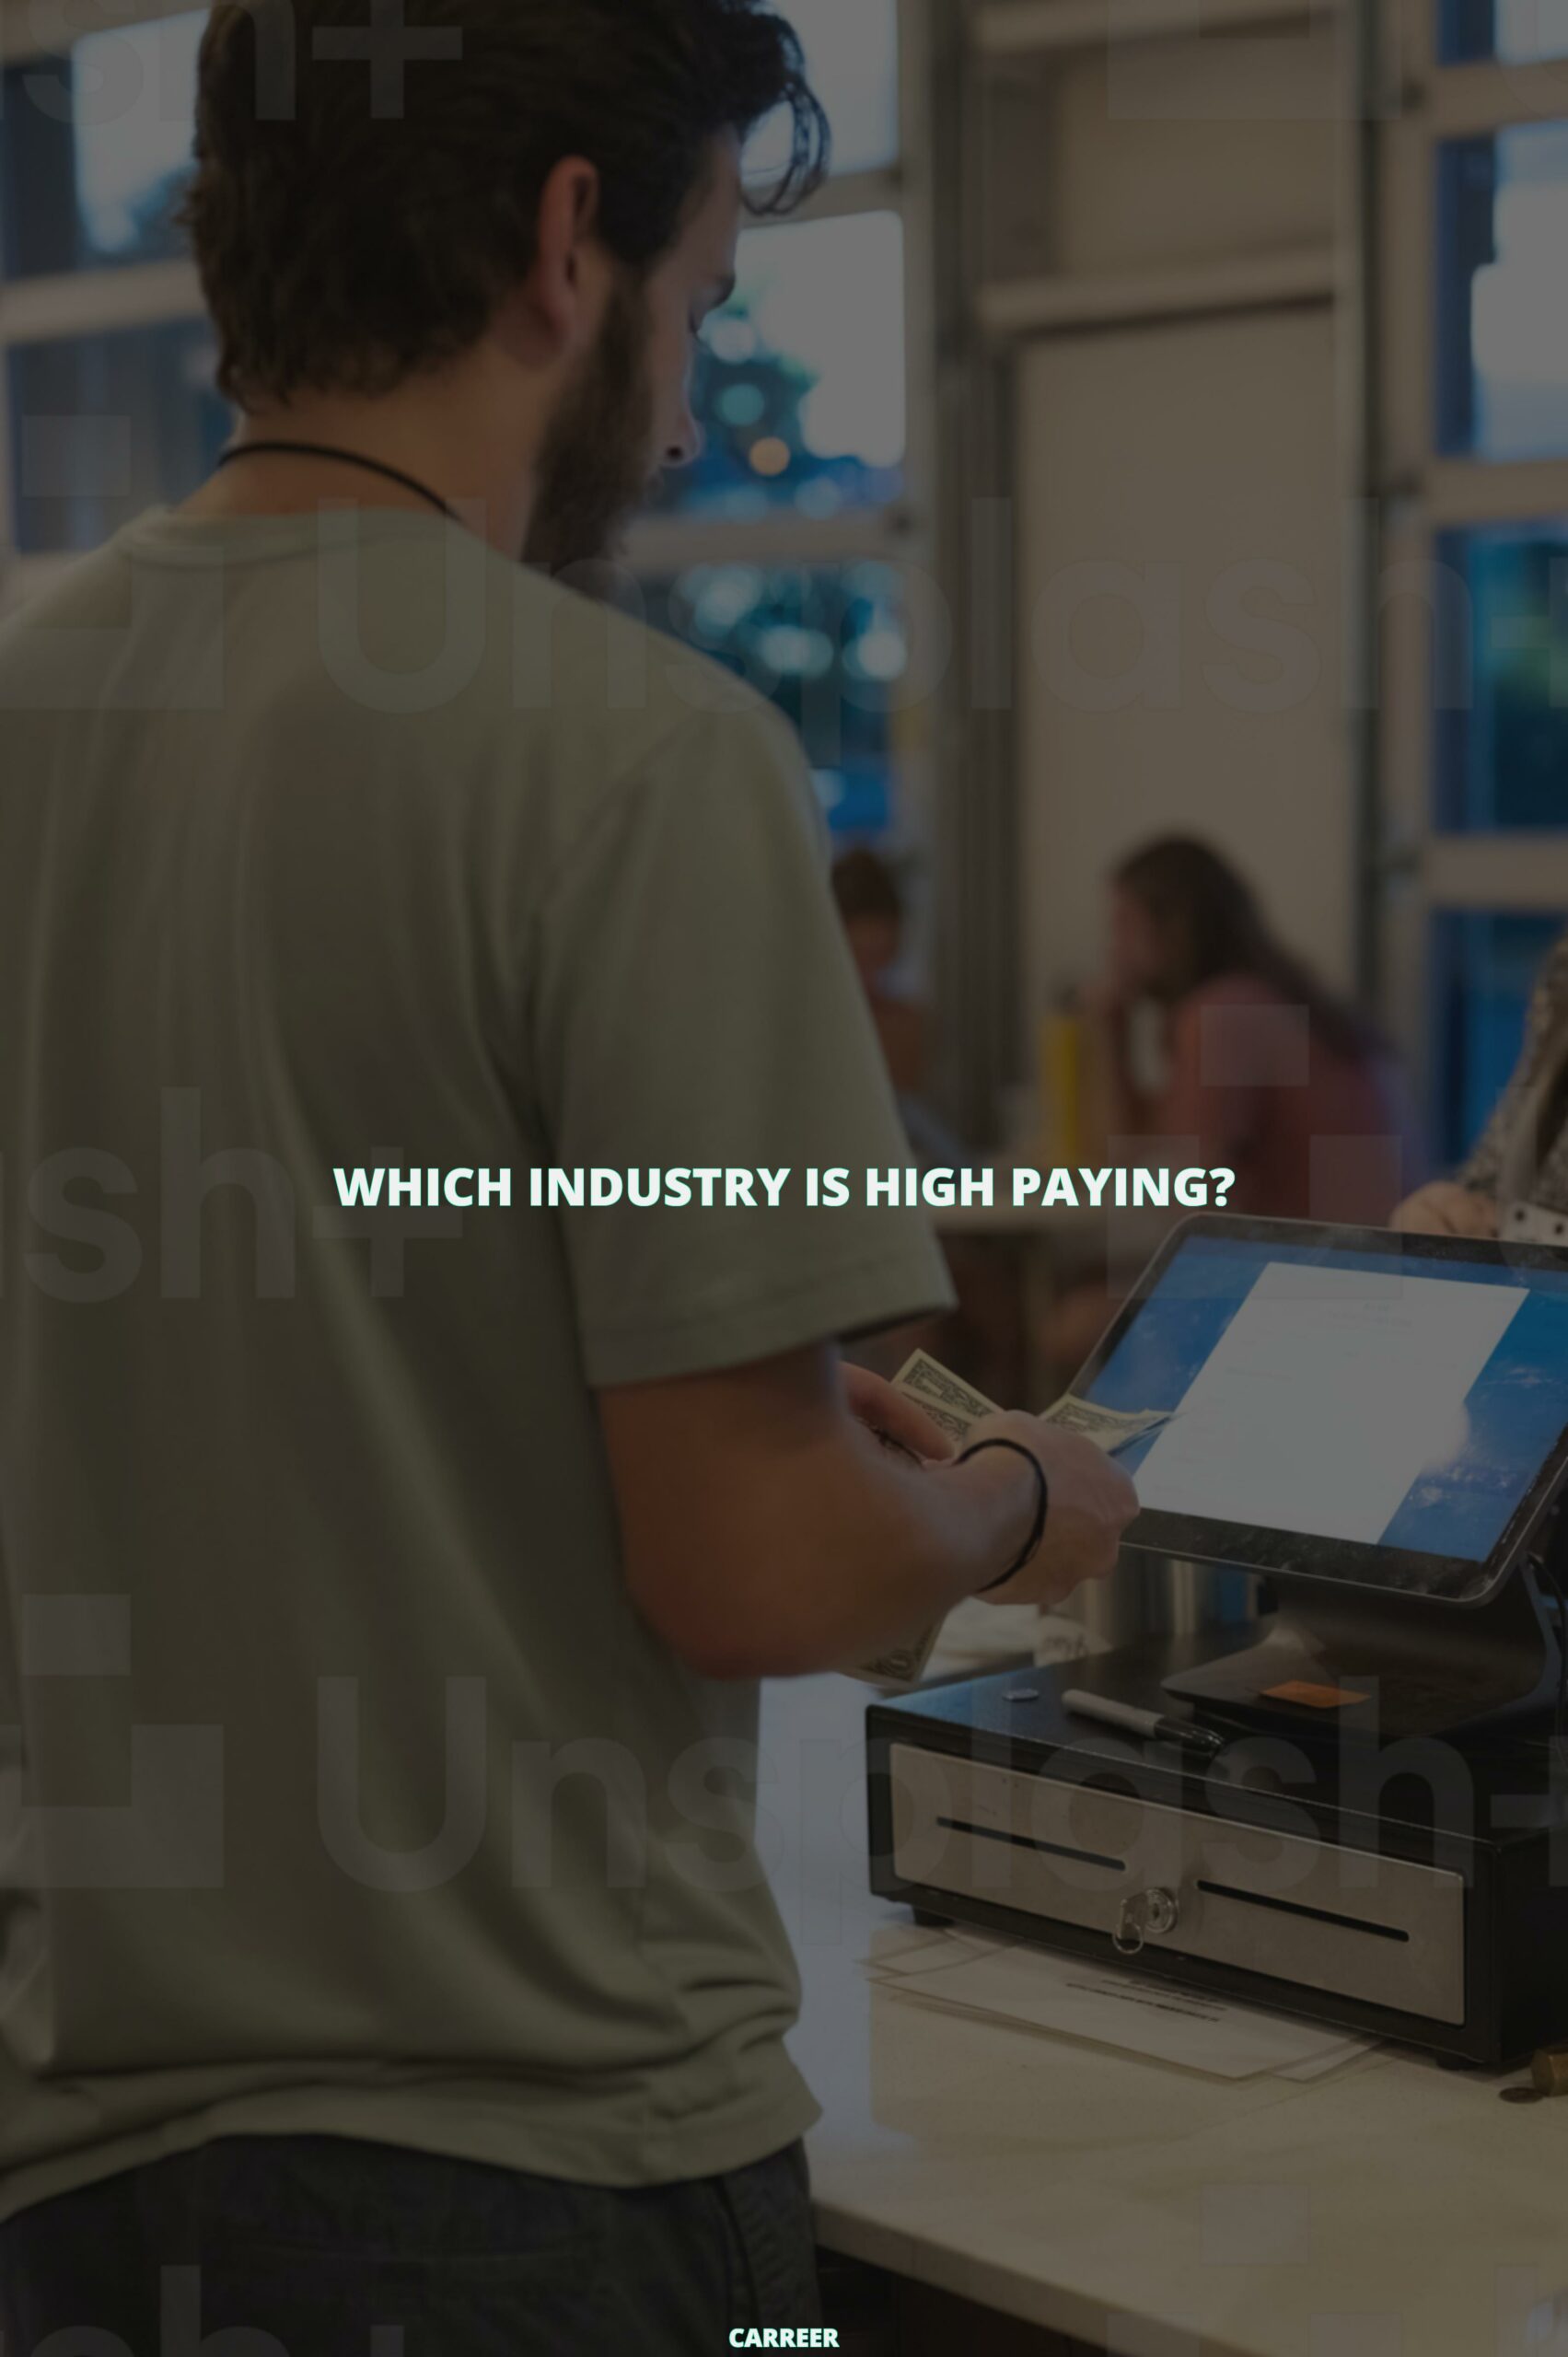 Which industry is high paying?